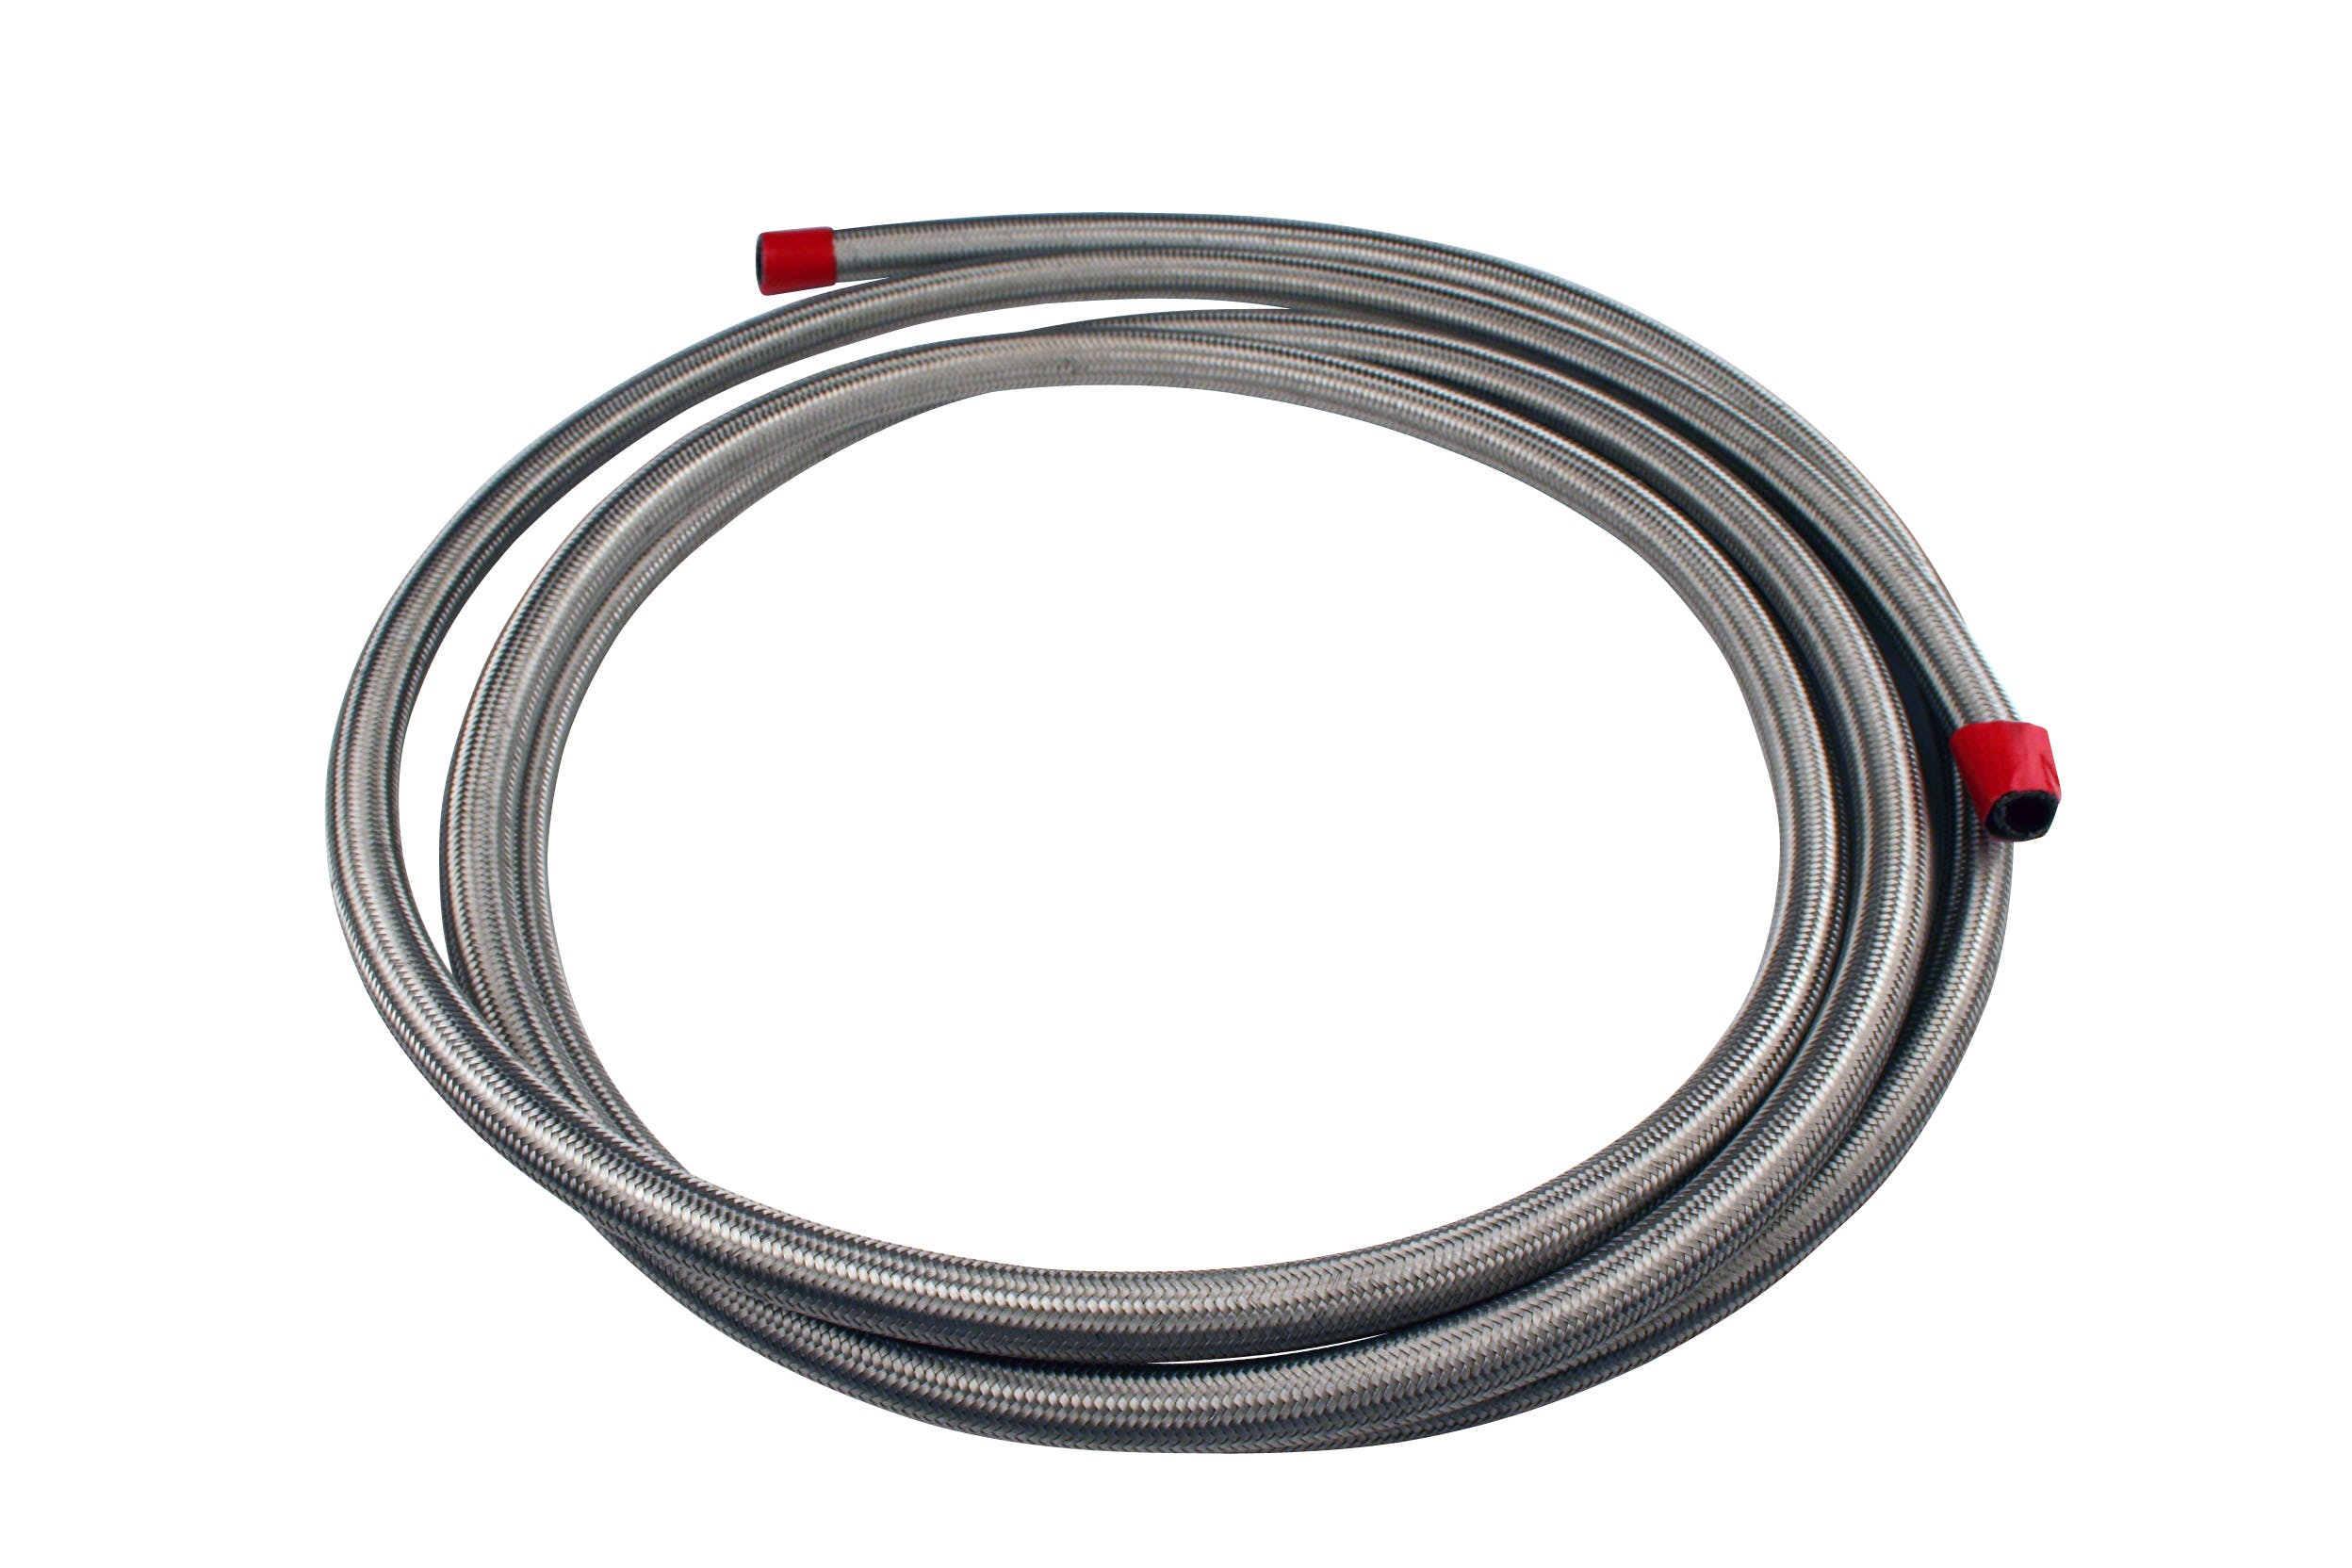 Aeromotive Fuel System 15706 Hose, Fuel, Stainless Steel Braided, AN-08 x 12